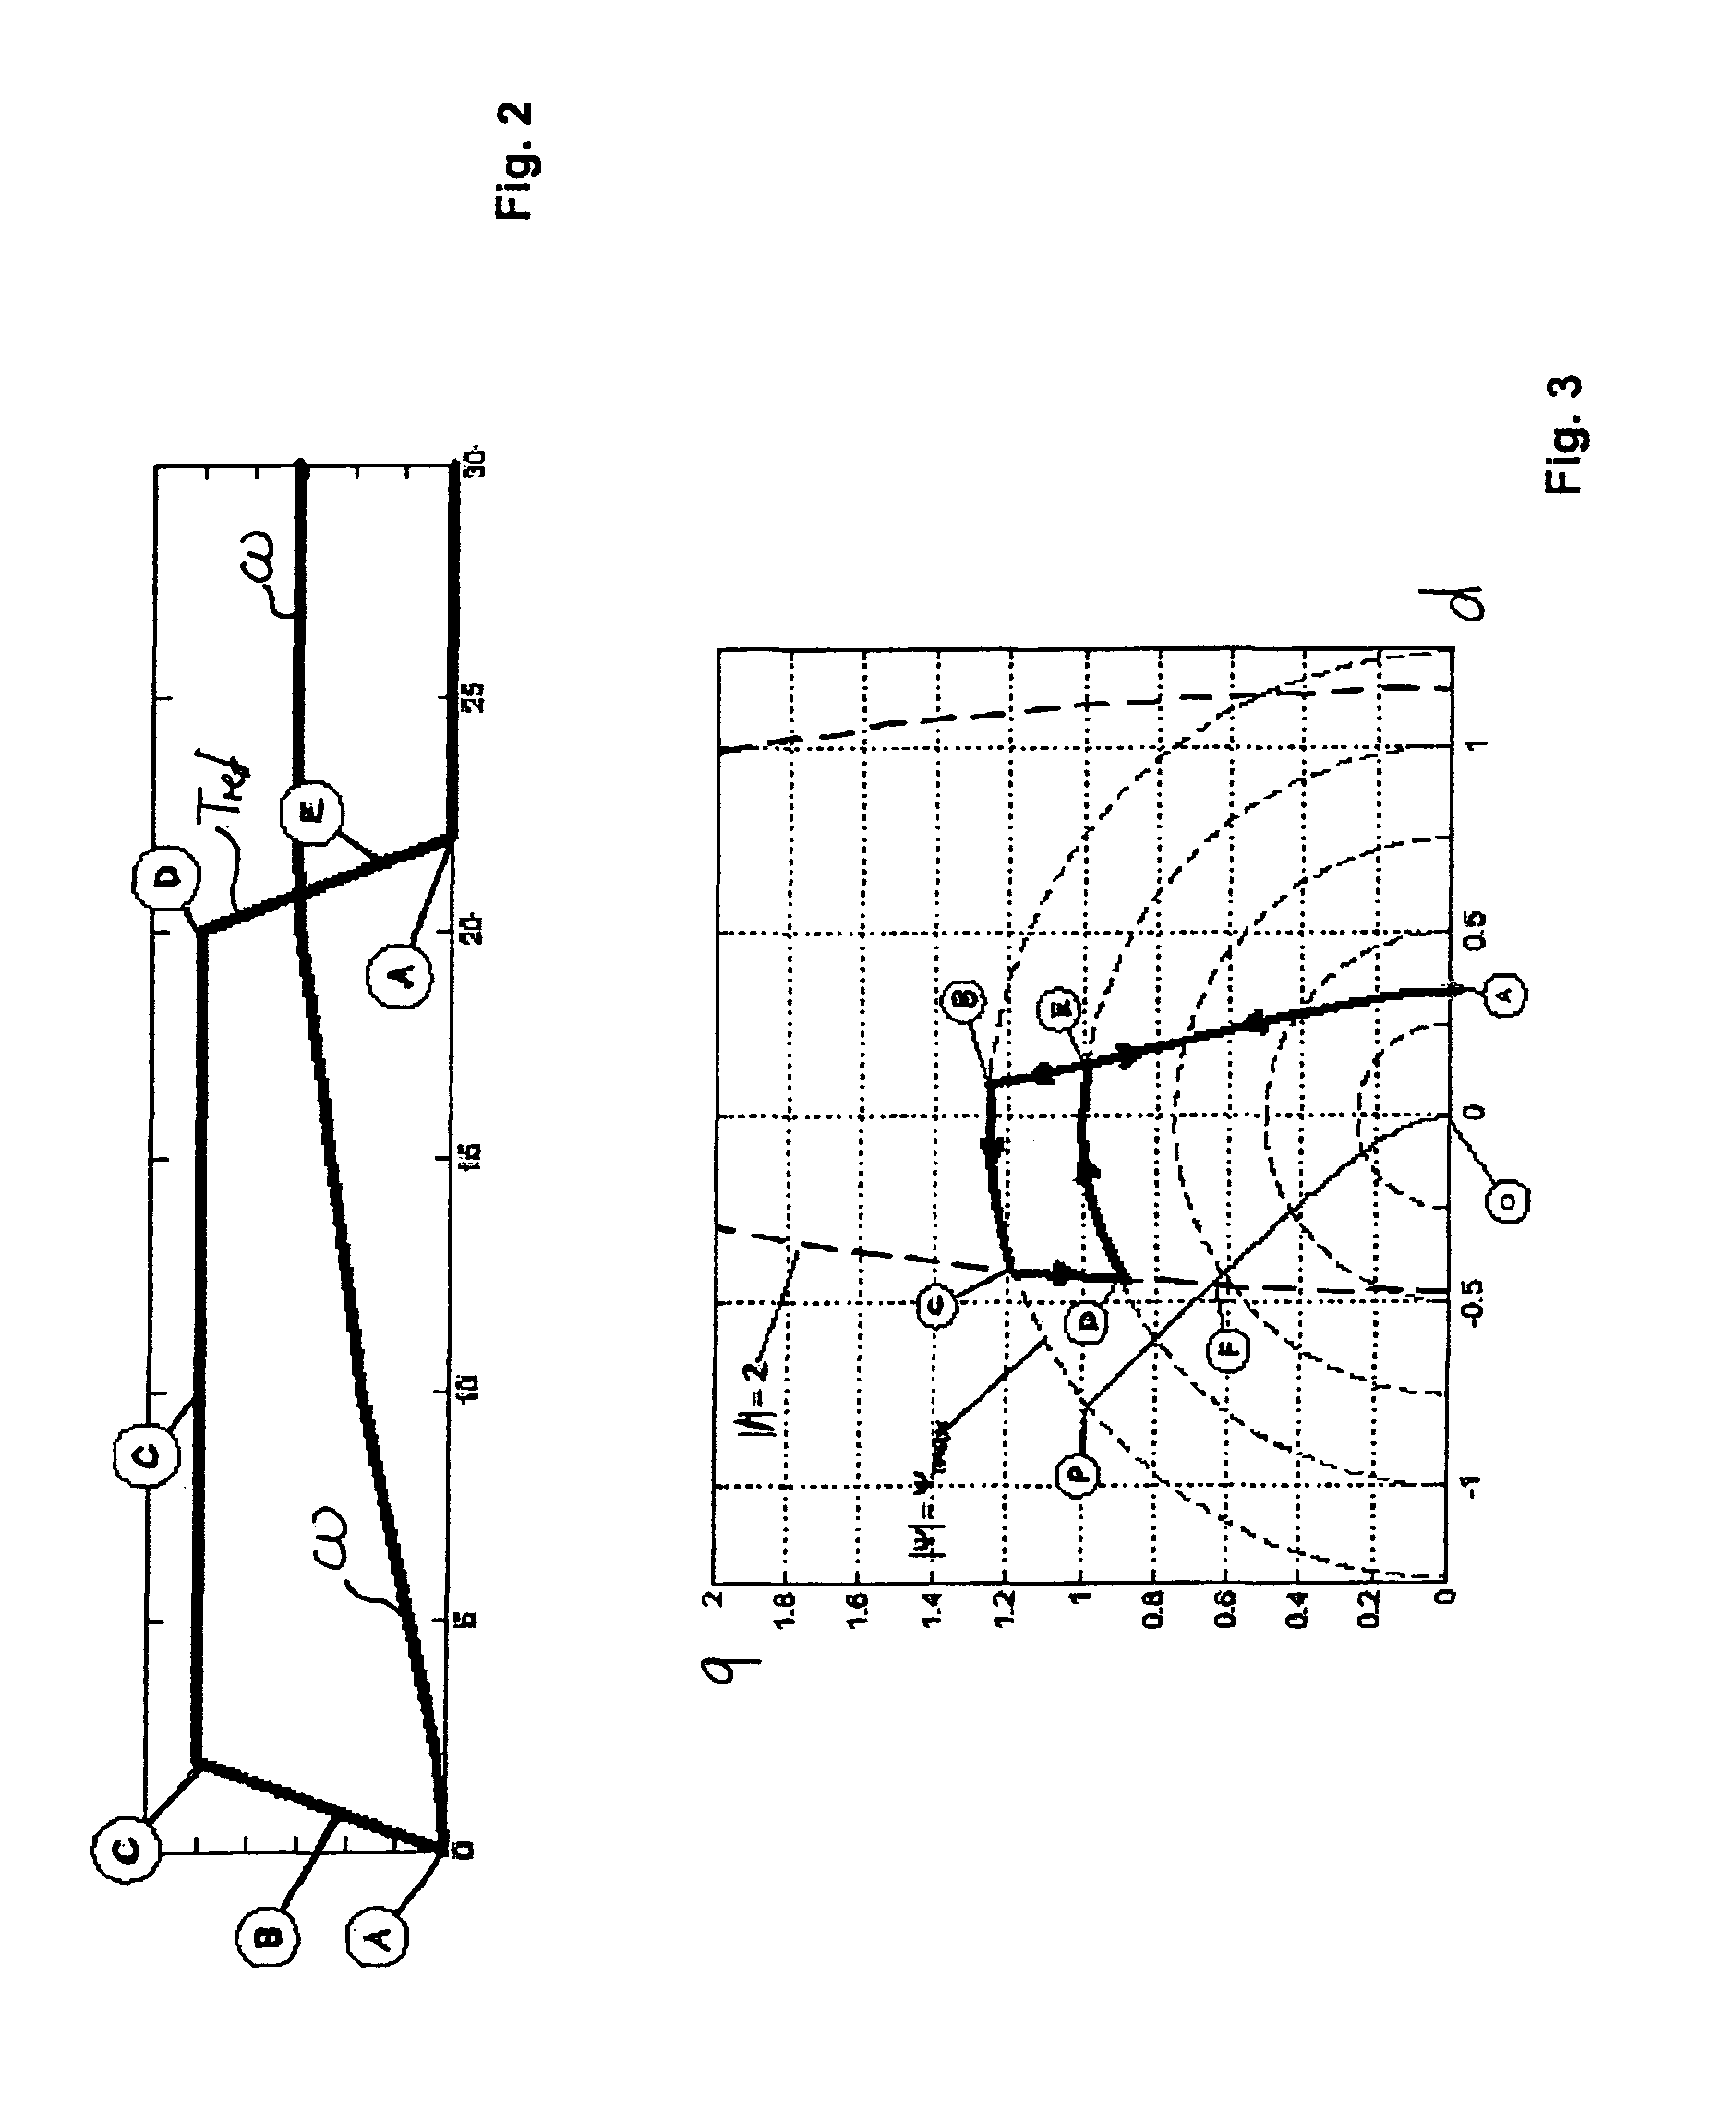 Operating a synchronous motor having a permanent magnet rotor